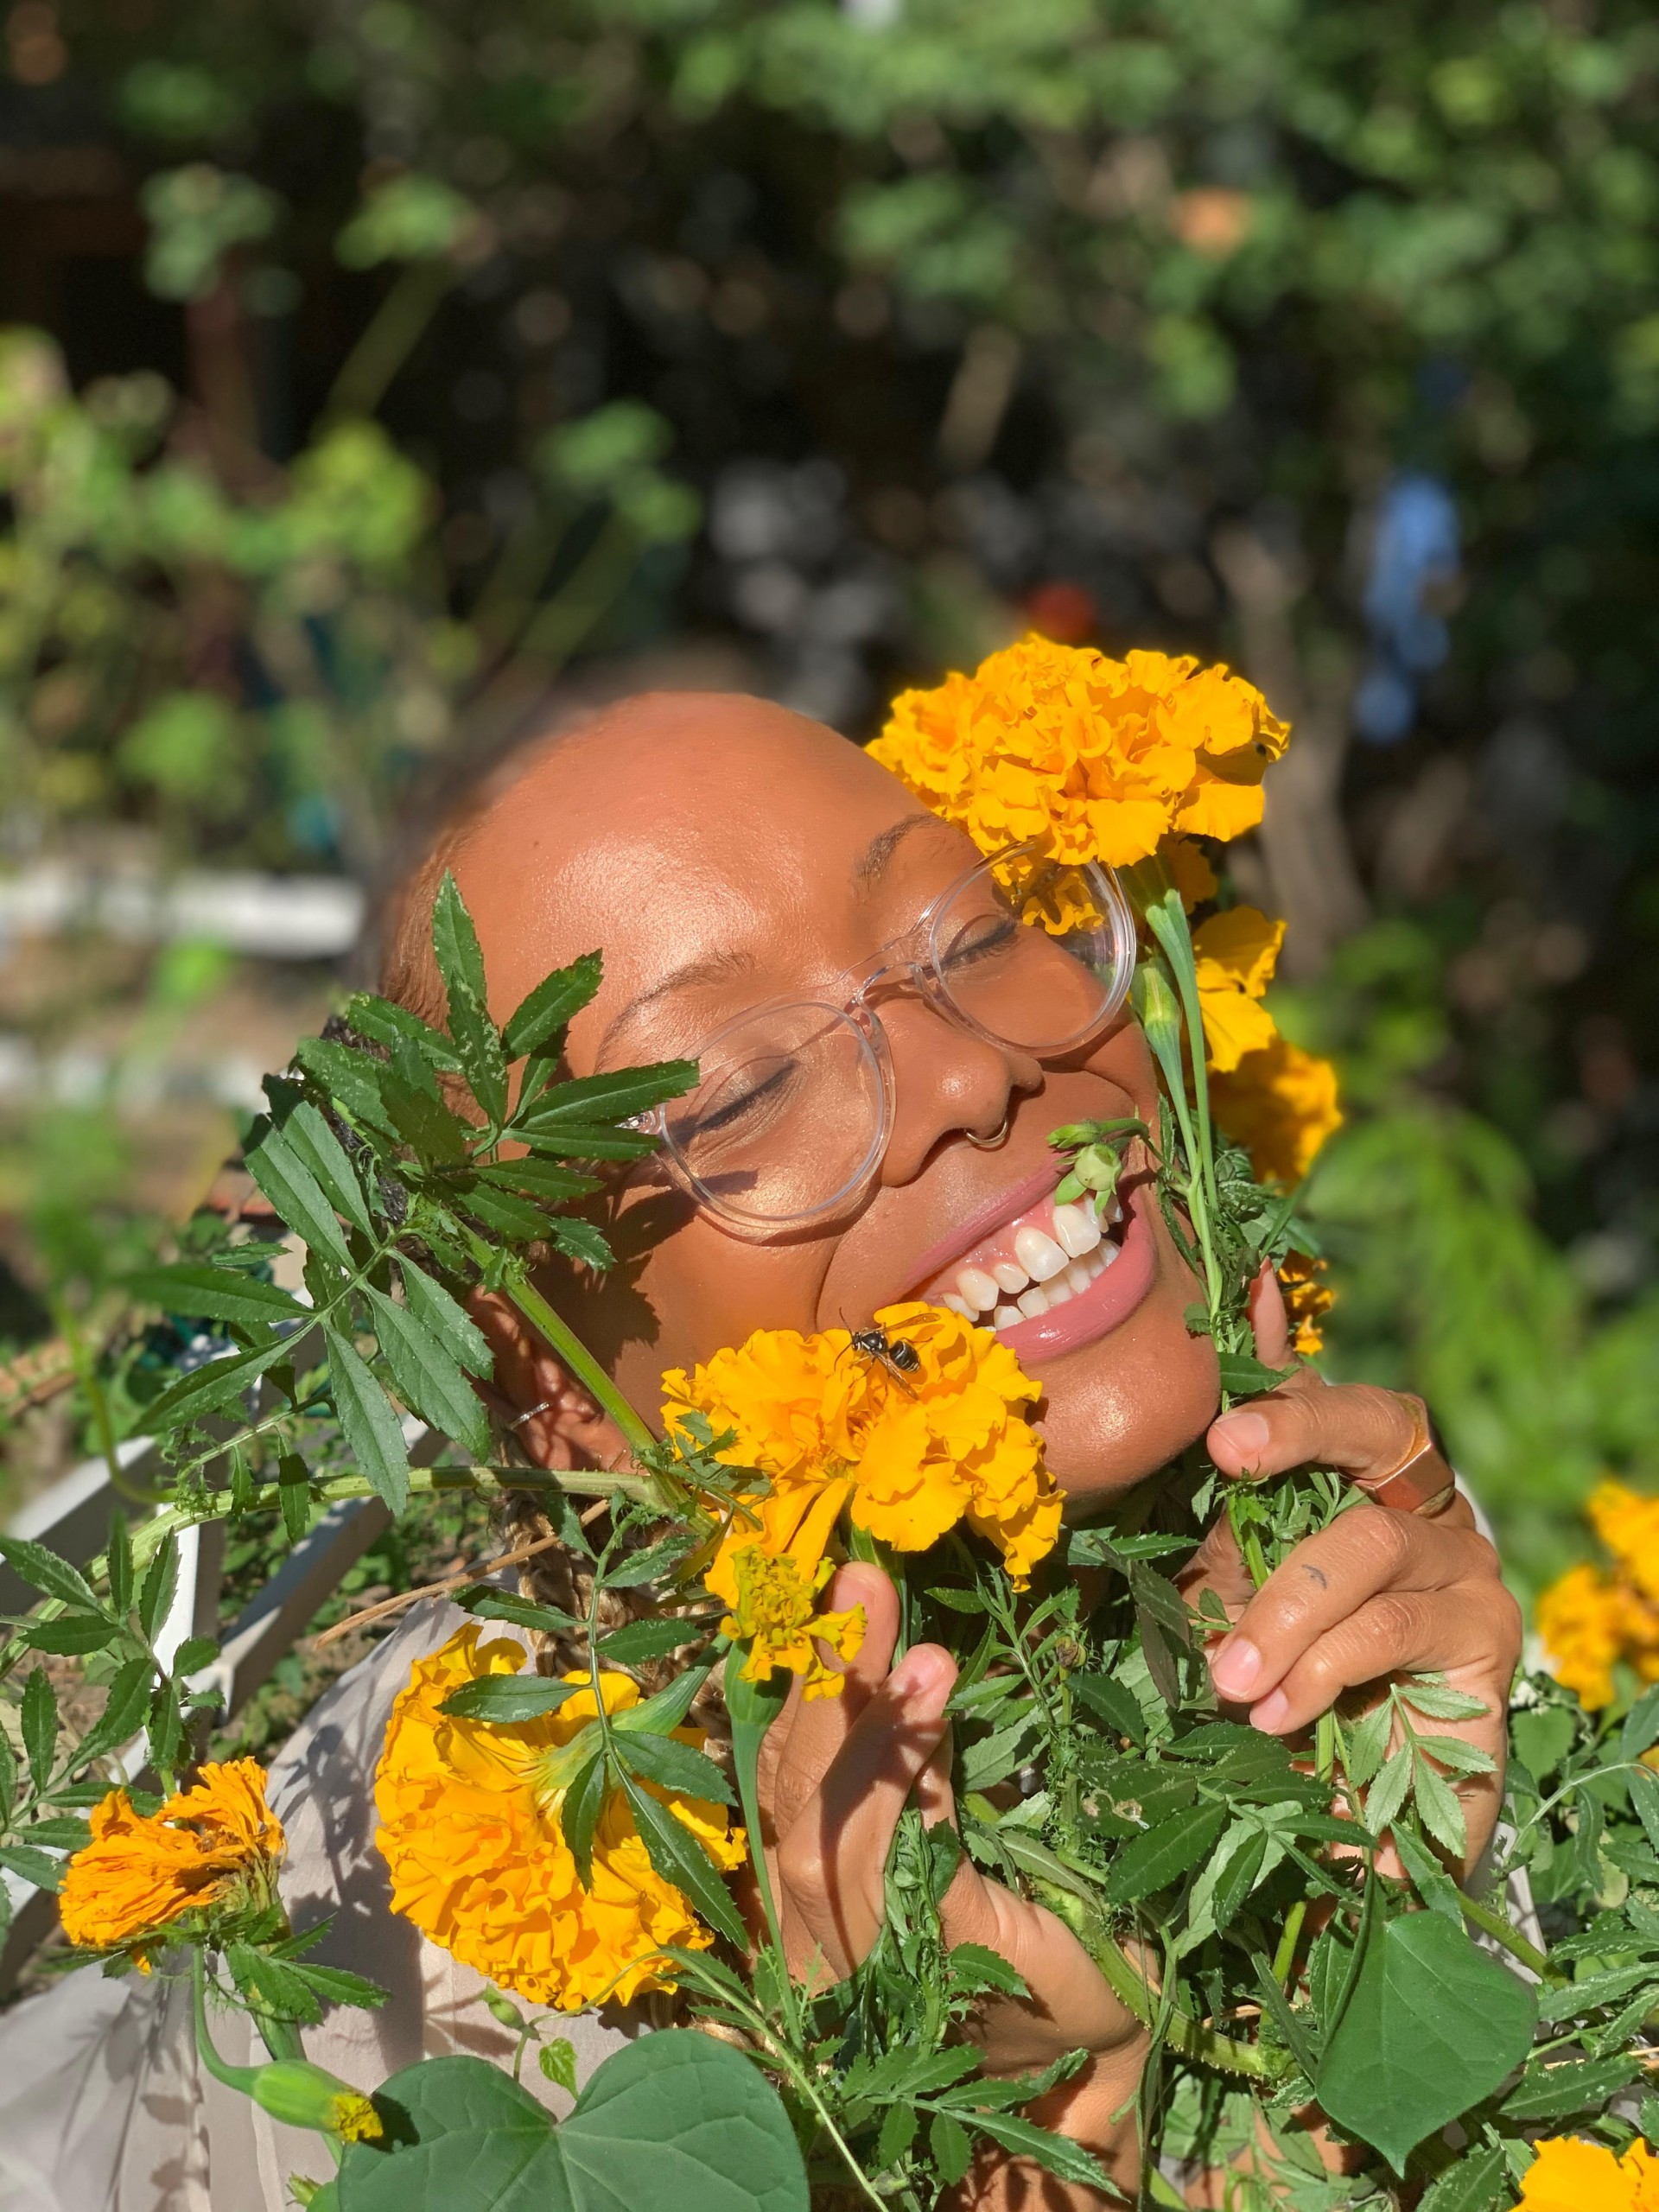 A headshot of J. Wortham. Their face is squished in between marigold flowers. They have glowing brown skin and glasses. They are smiling widely.